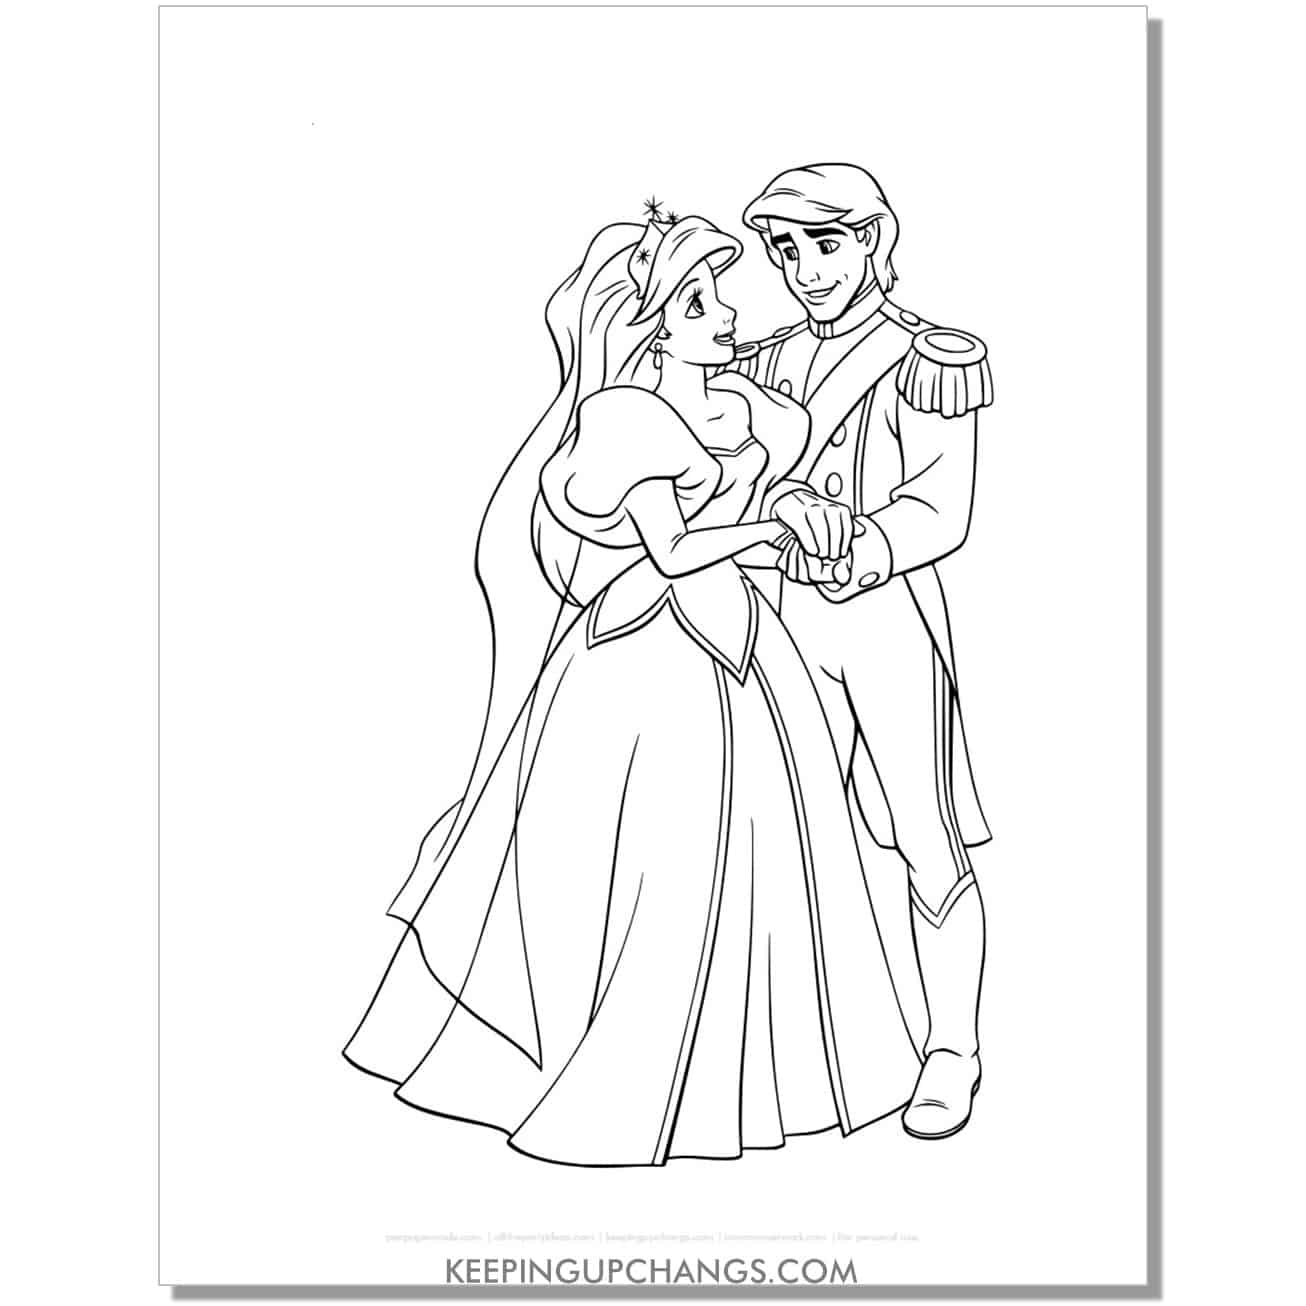 little mermaid ariel marrying prince eric coloring page, sheet.